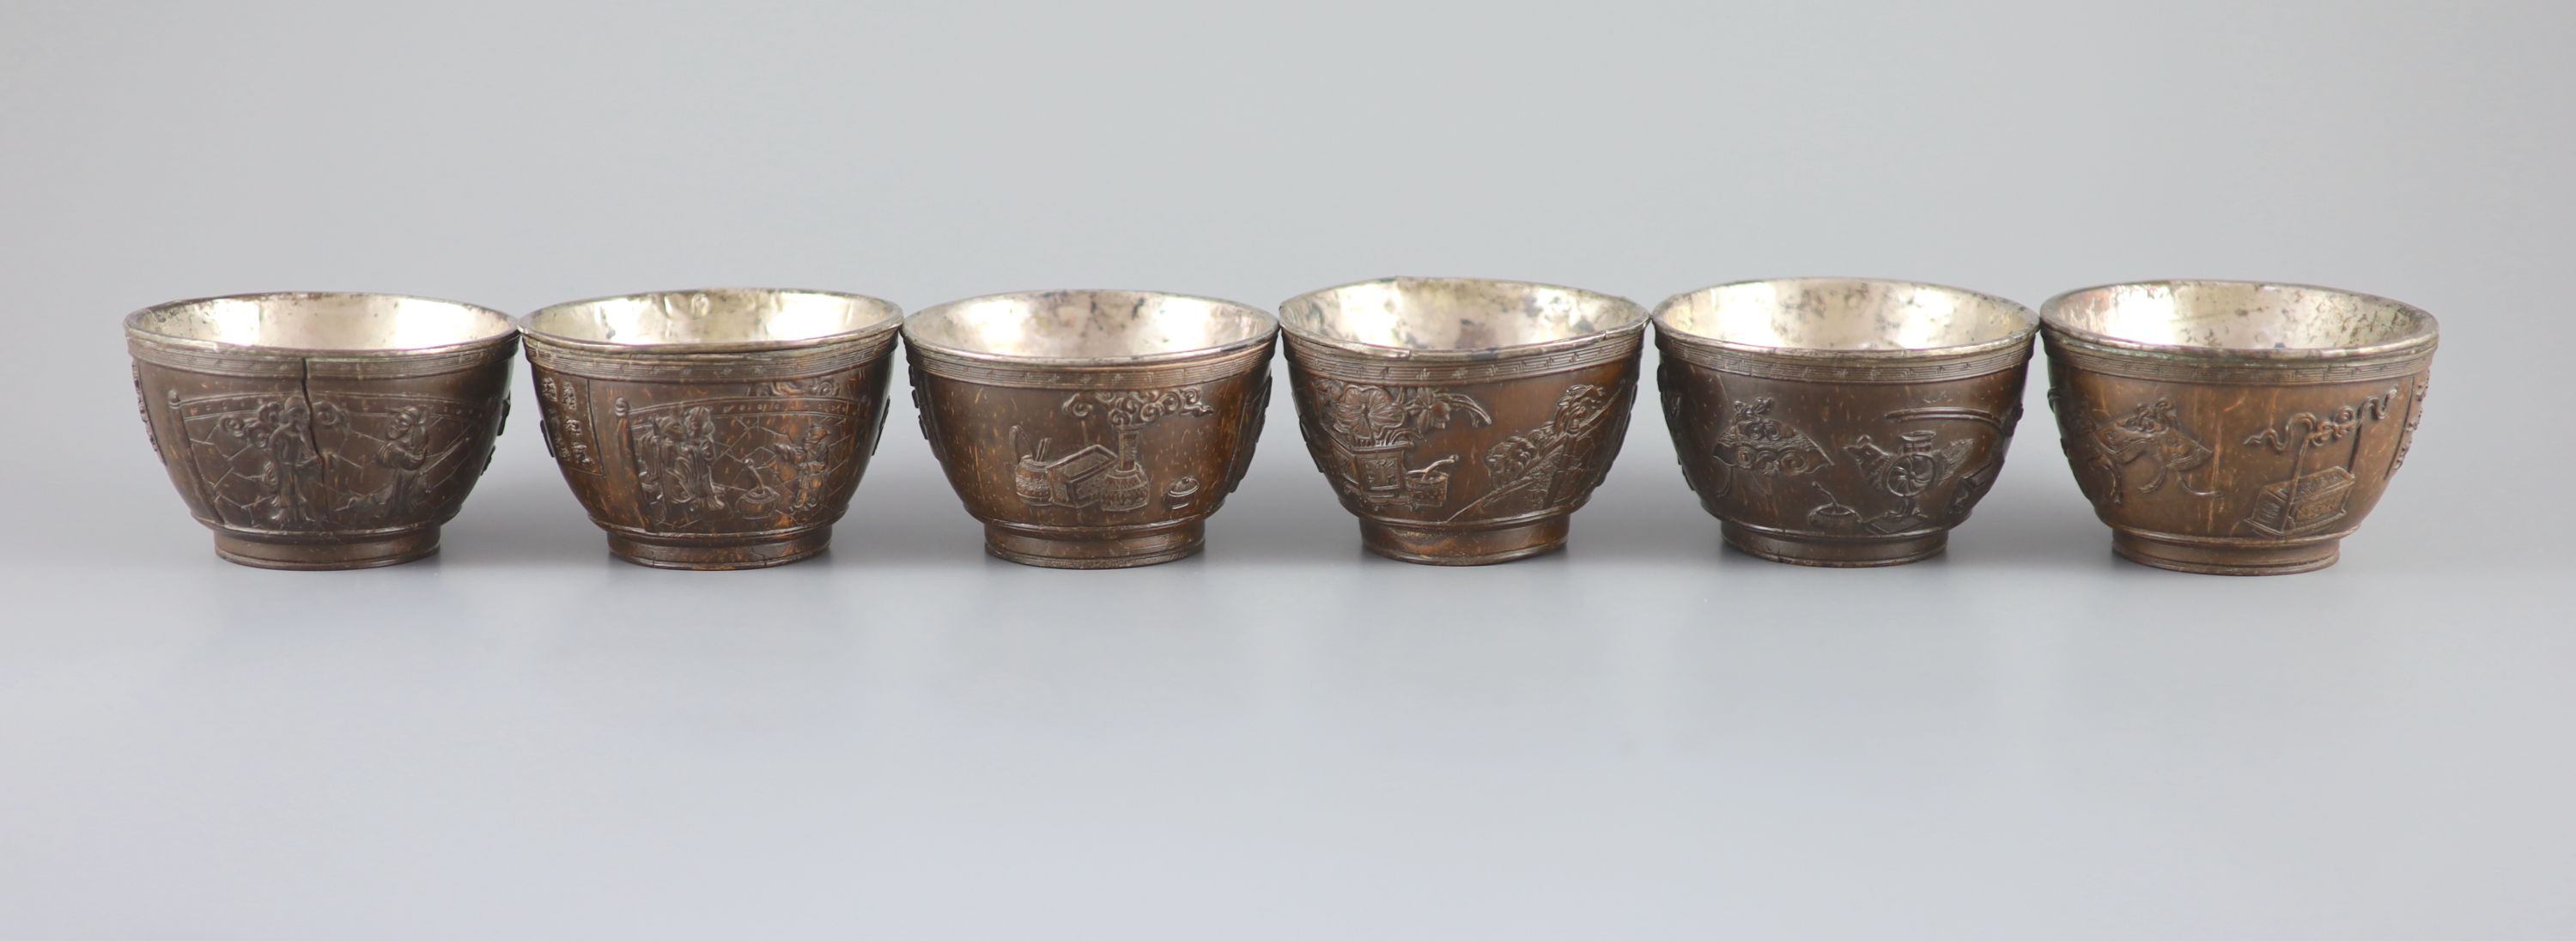 A set of six Chinese coconut cups, 18th/19th century, 8.3 cm diameter